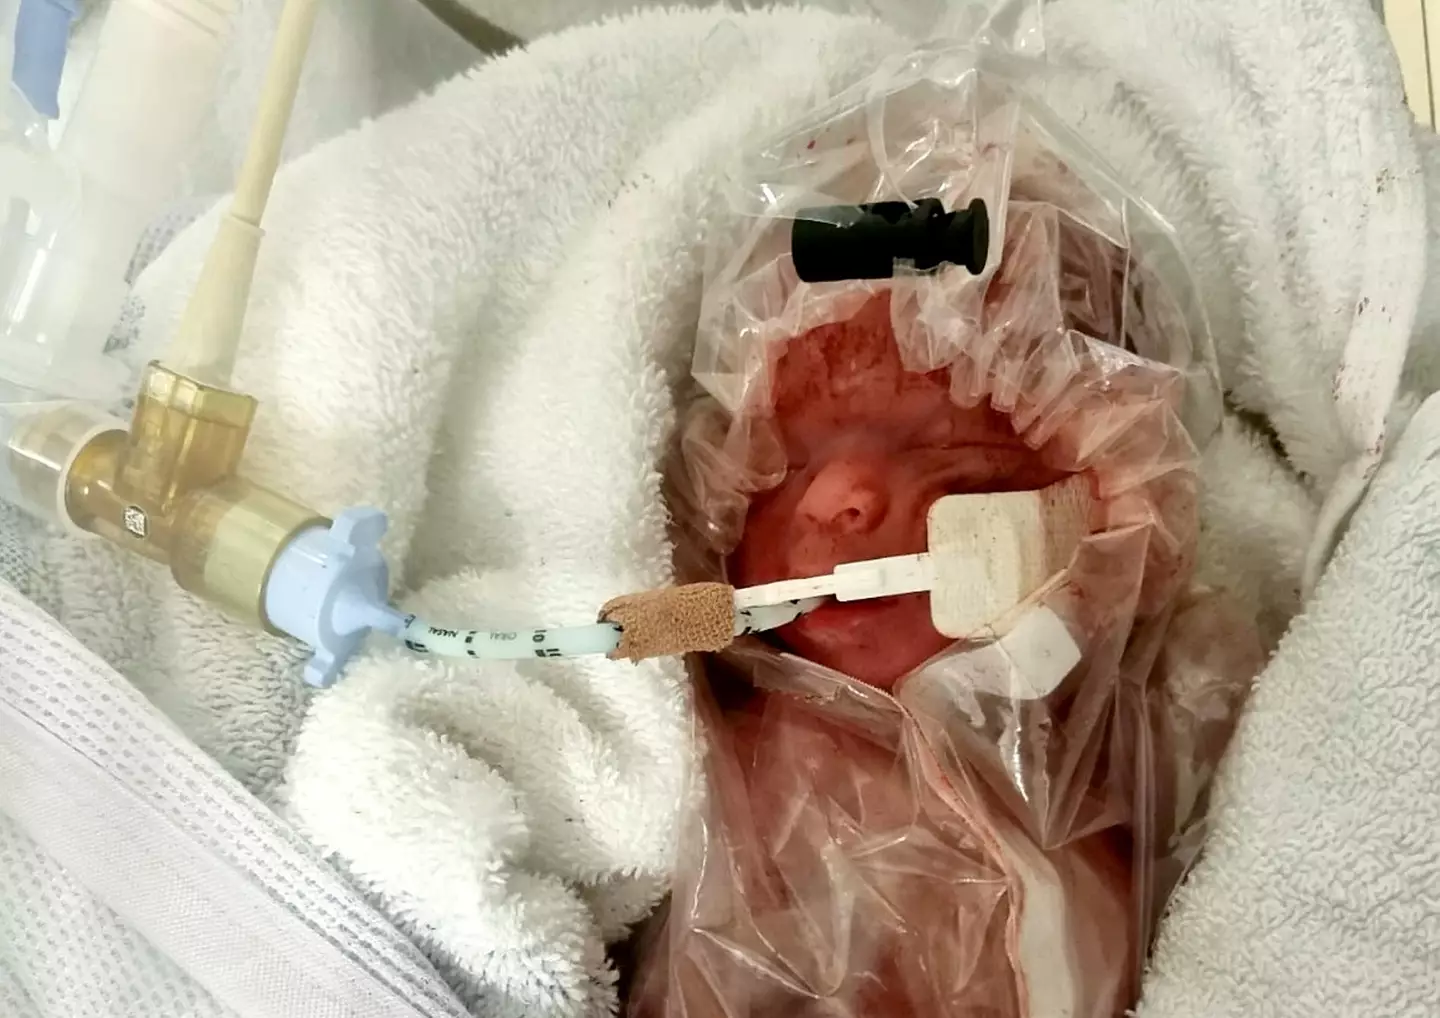 One of Britain's smallest babies has defied the odds and returned home after being born at 25 weeks.